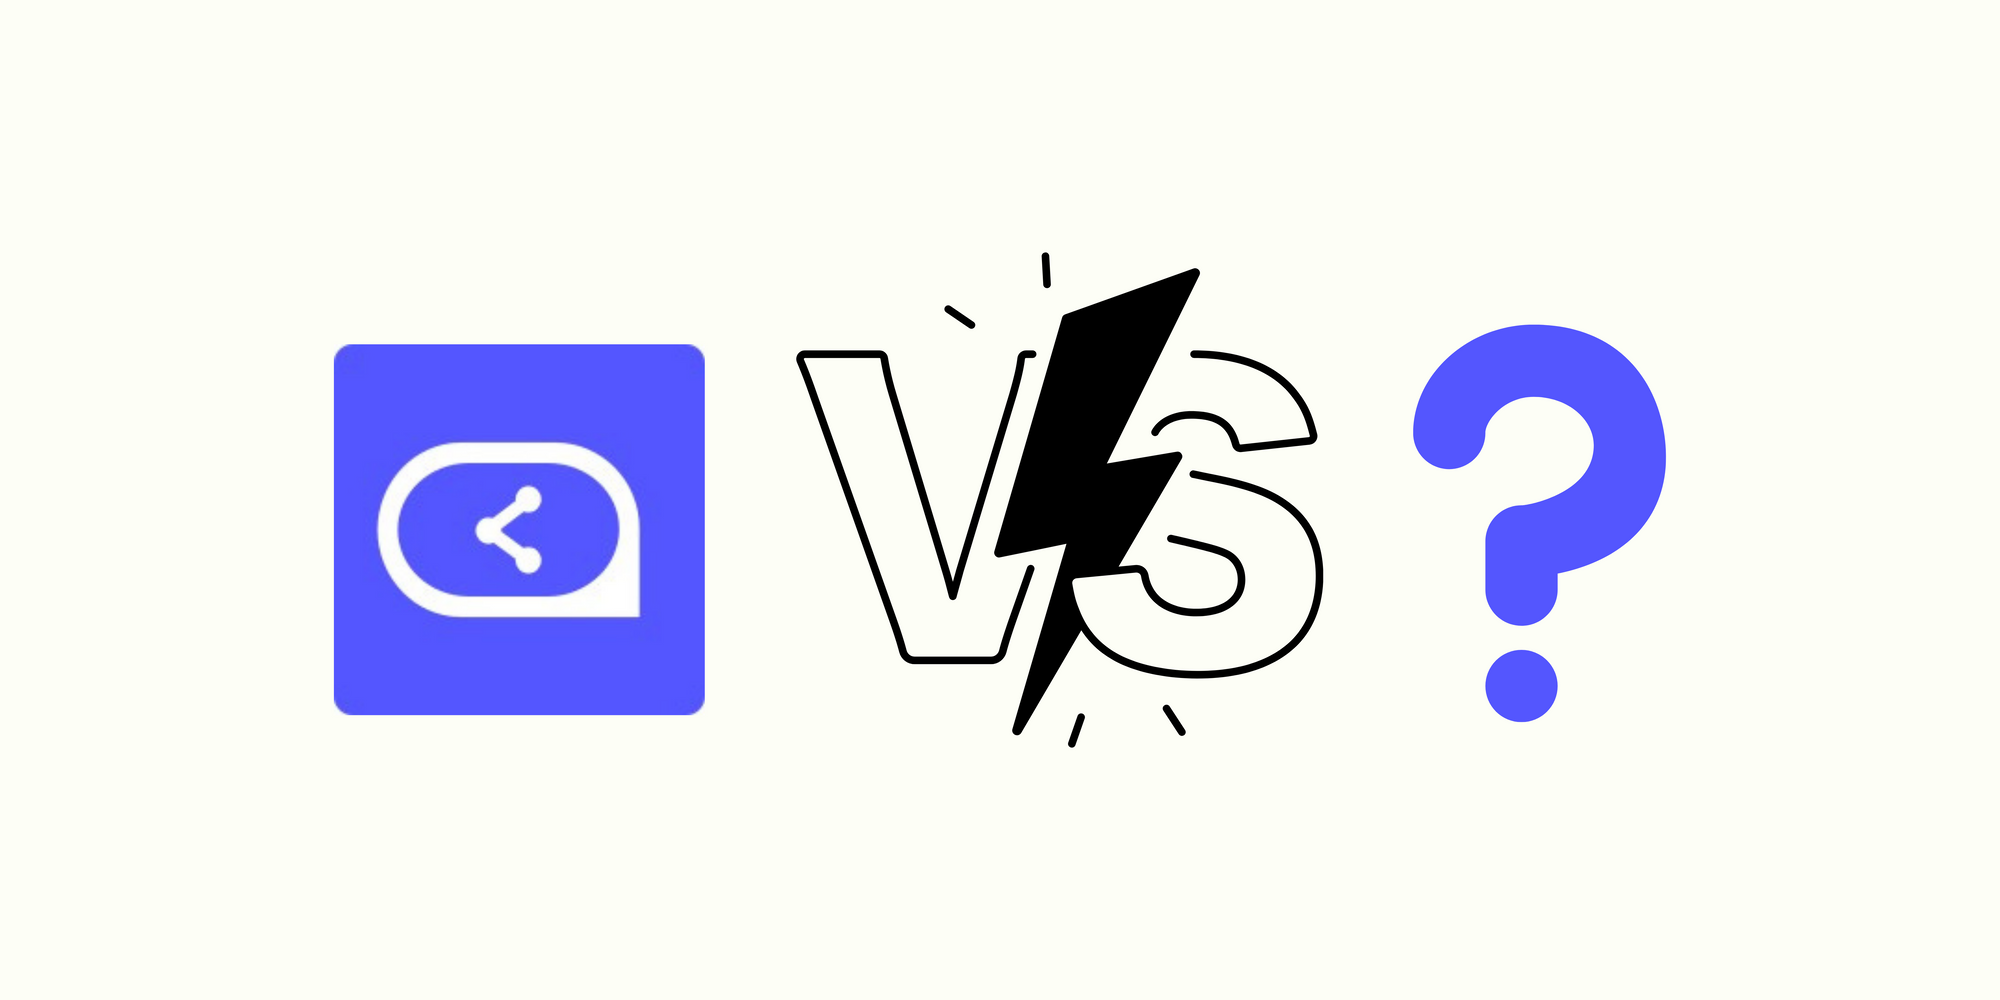 Sleeknote icon, versus symbol and a question mark to mention the alternatives on a fair background